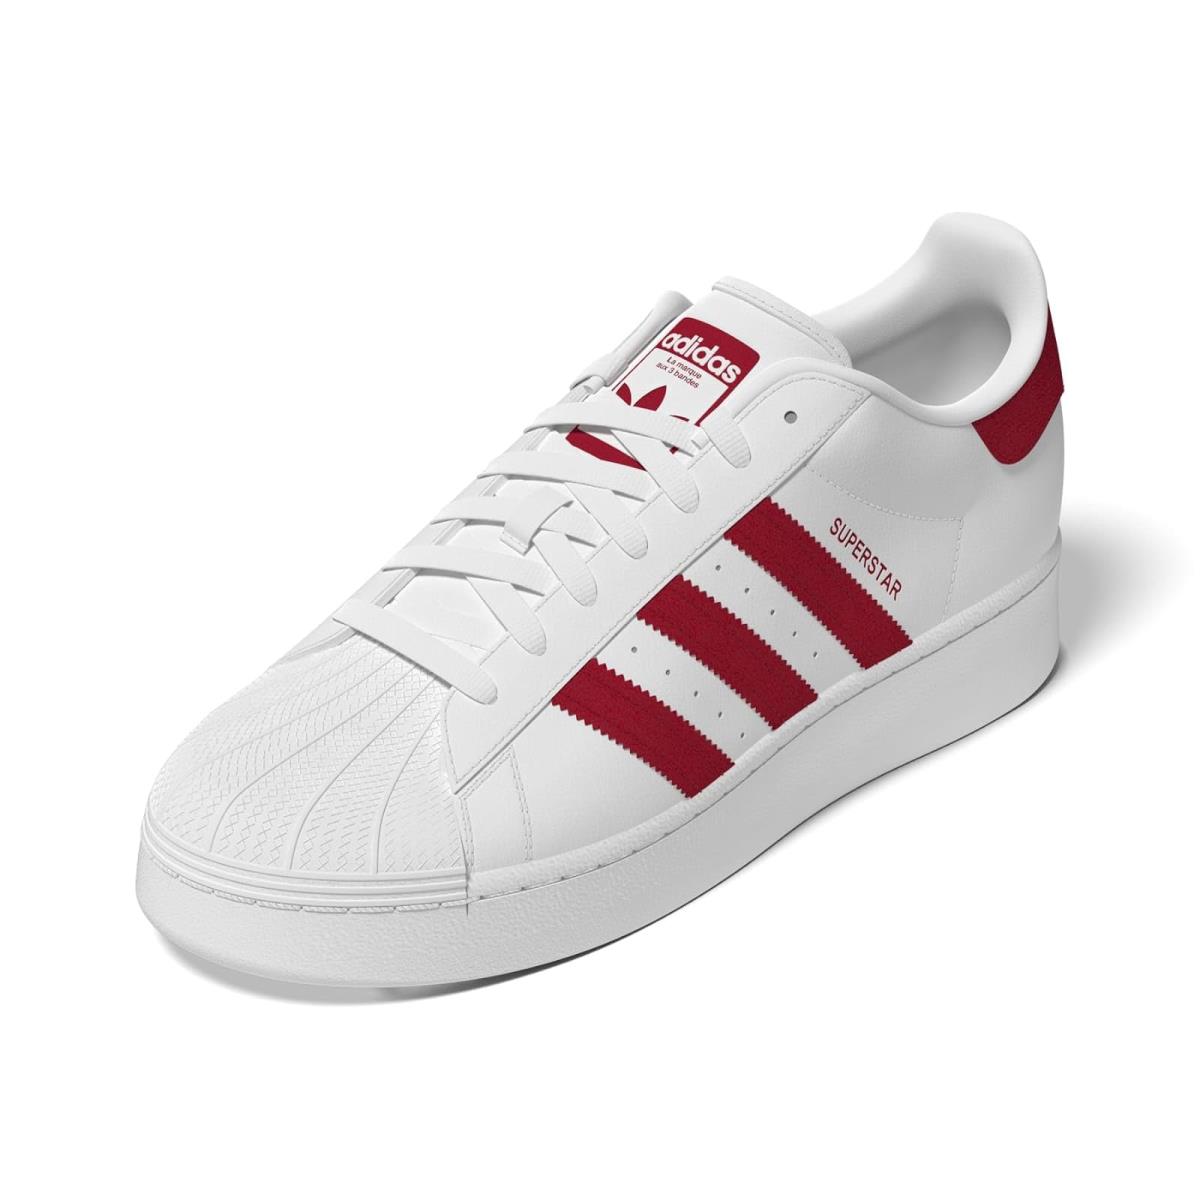 Unisex Sneakers Athletic Shoes Adidas Originals Superstar Xlg White/Better Scarlet/Footwear White